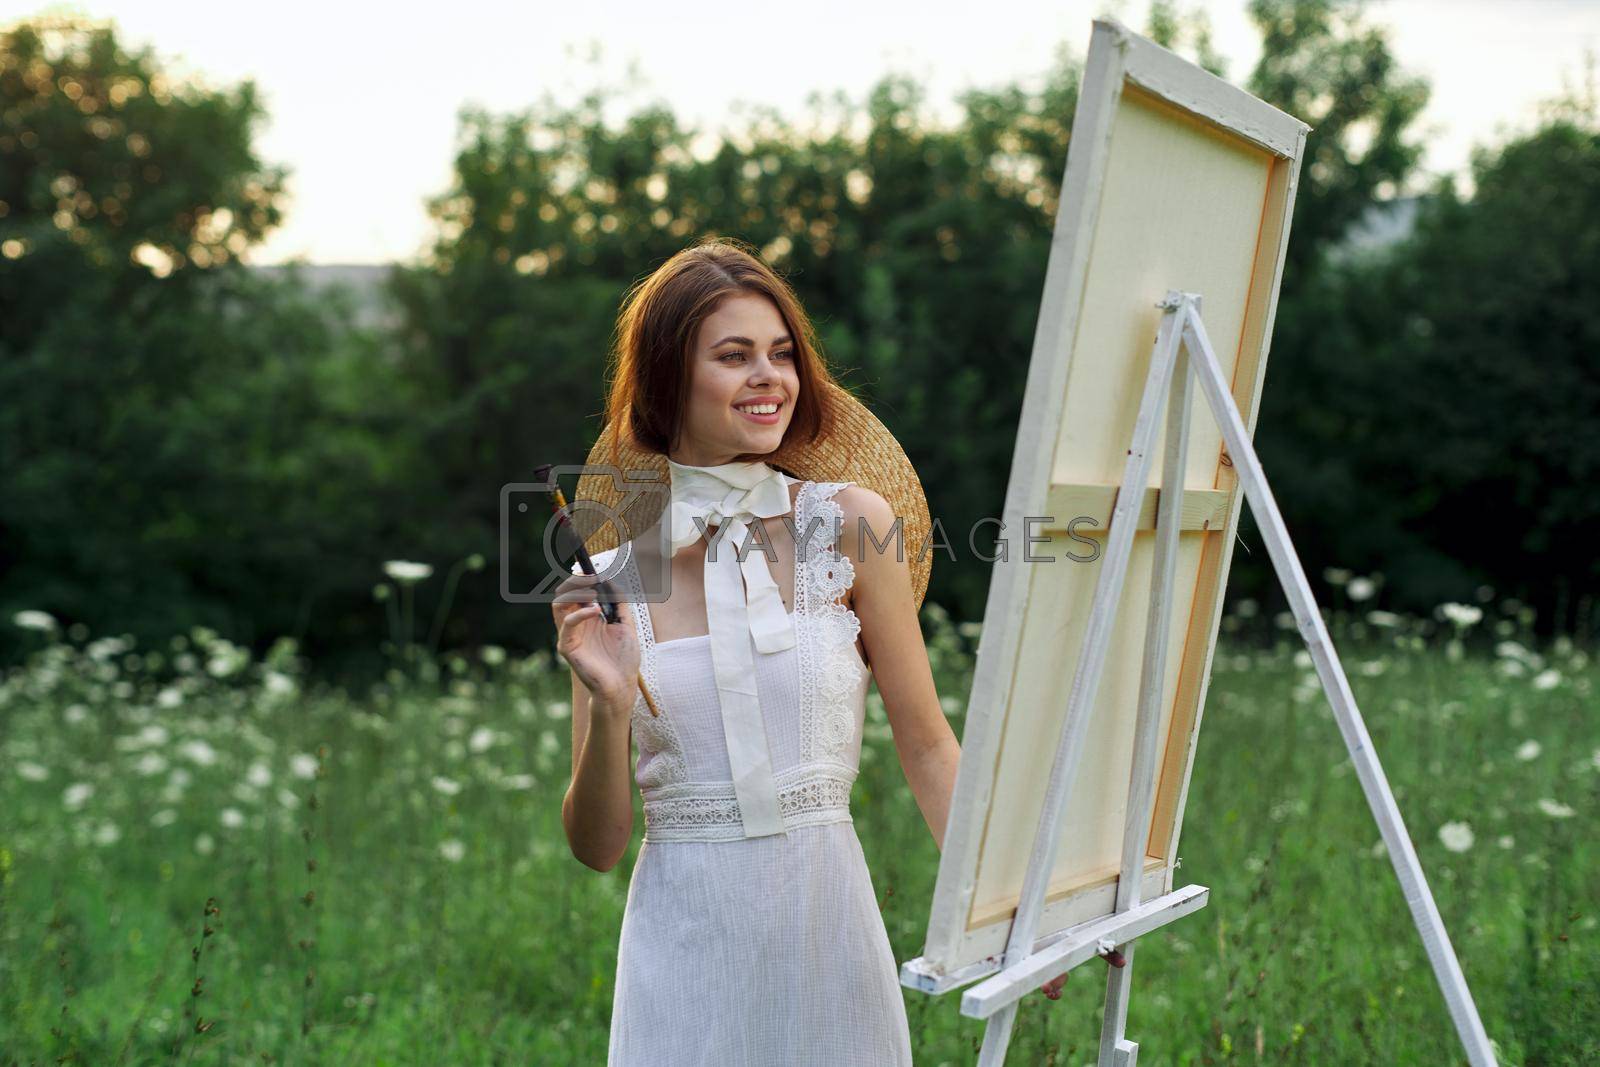 Royalty free image of woman artist outdoors visage creative hobby lifestyle by Vichizh